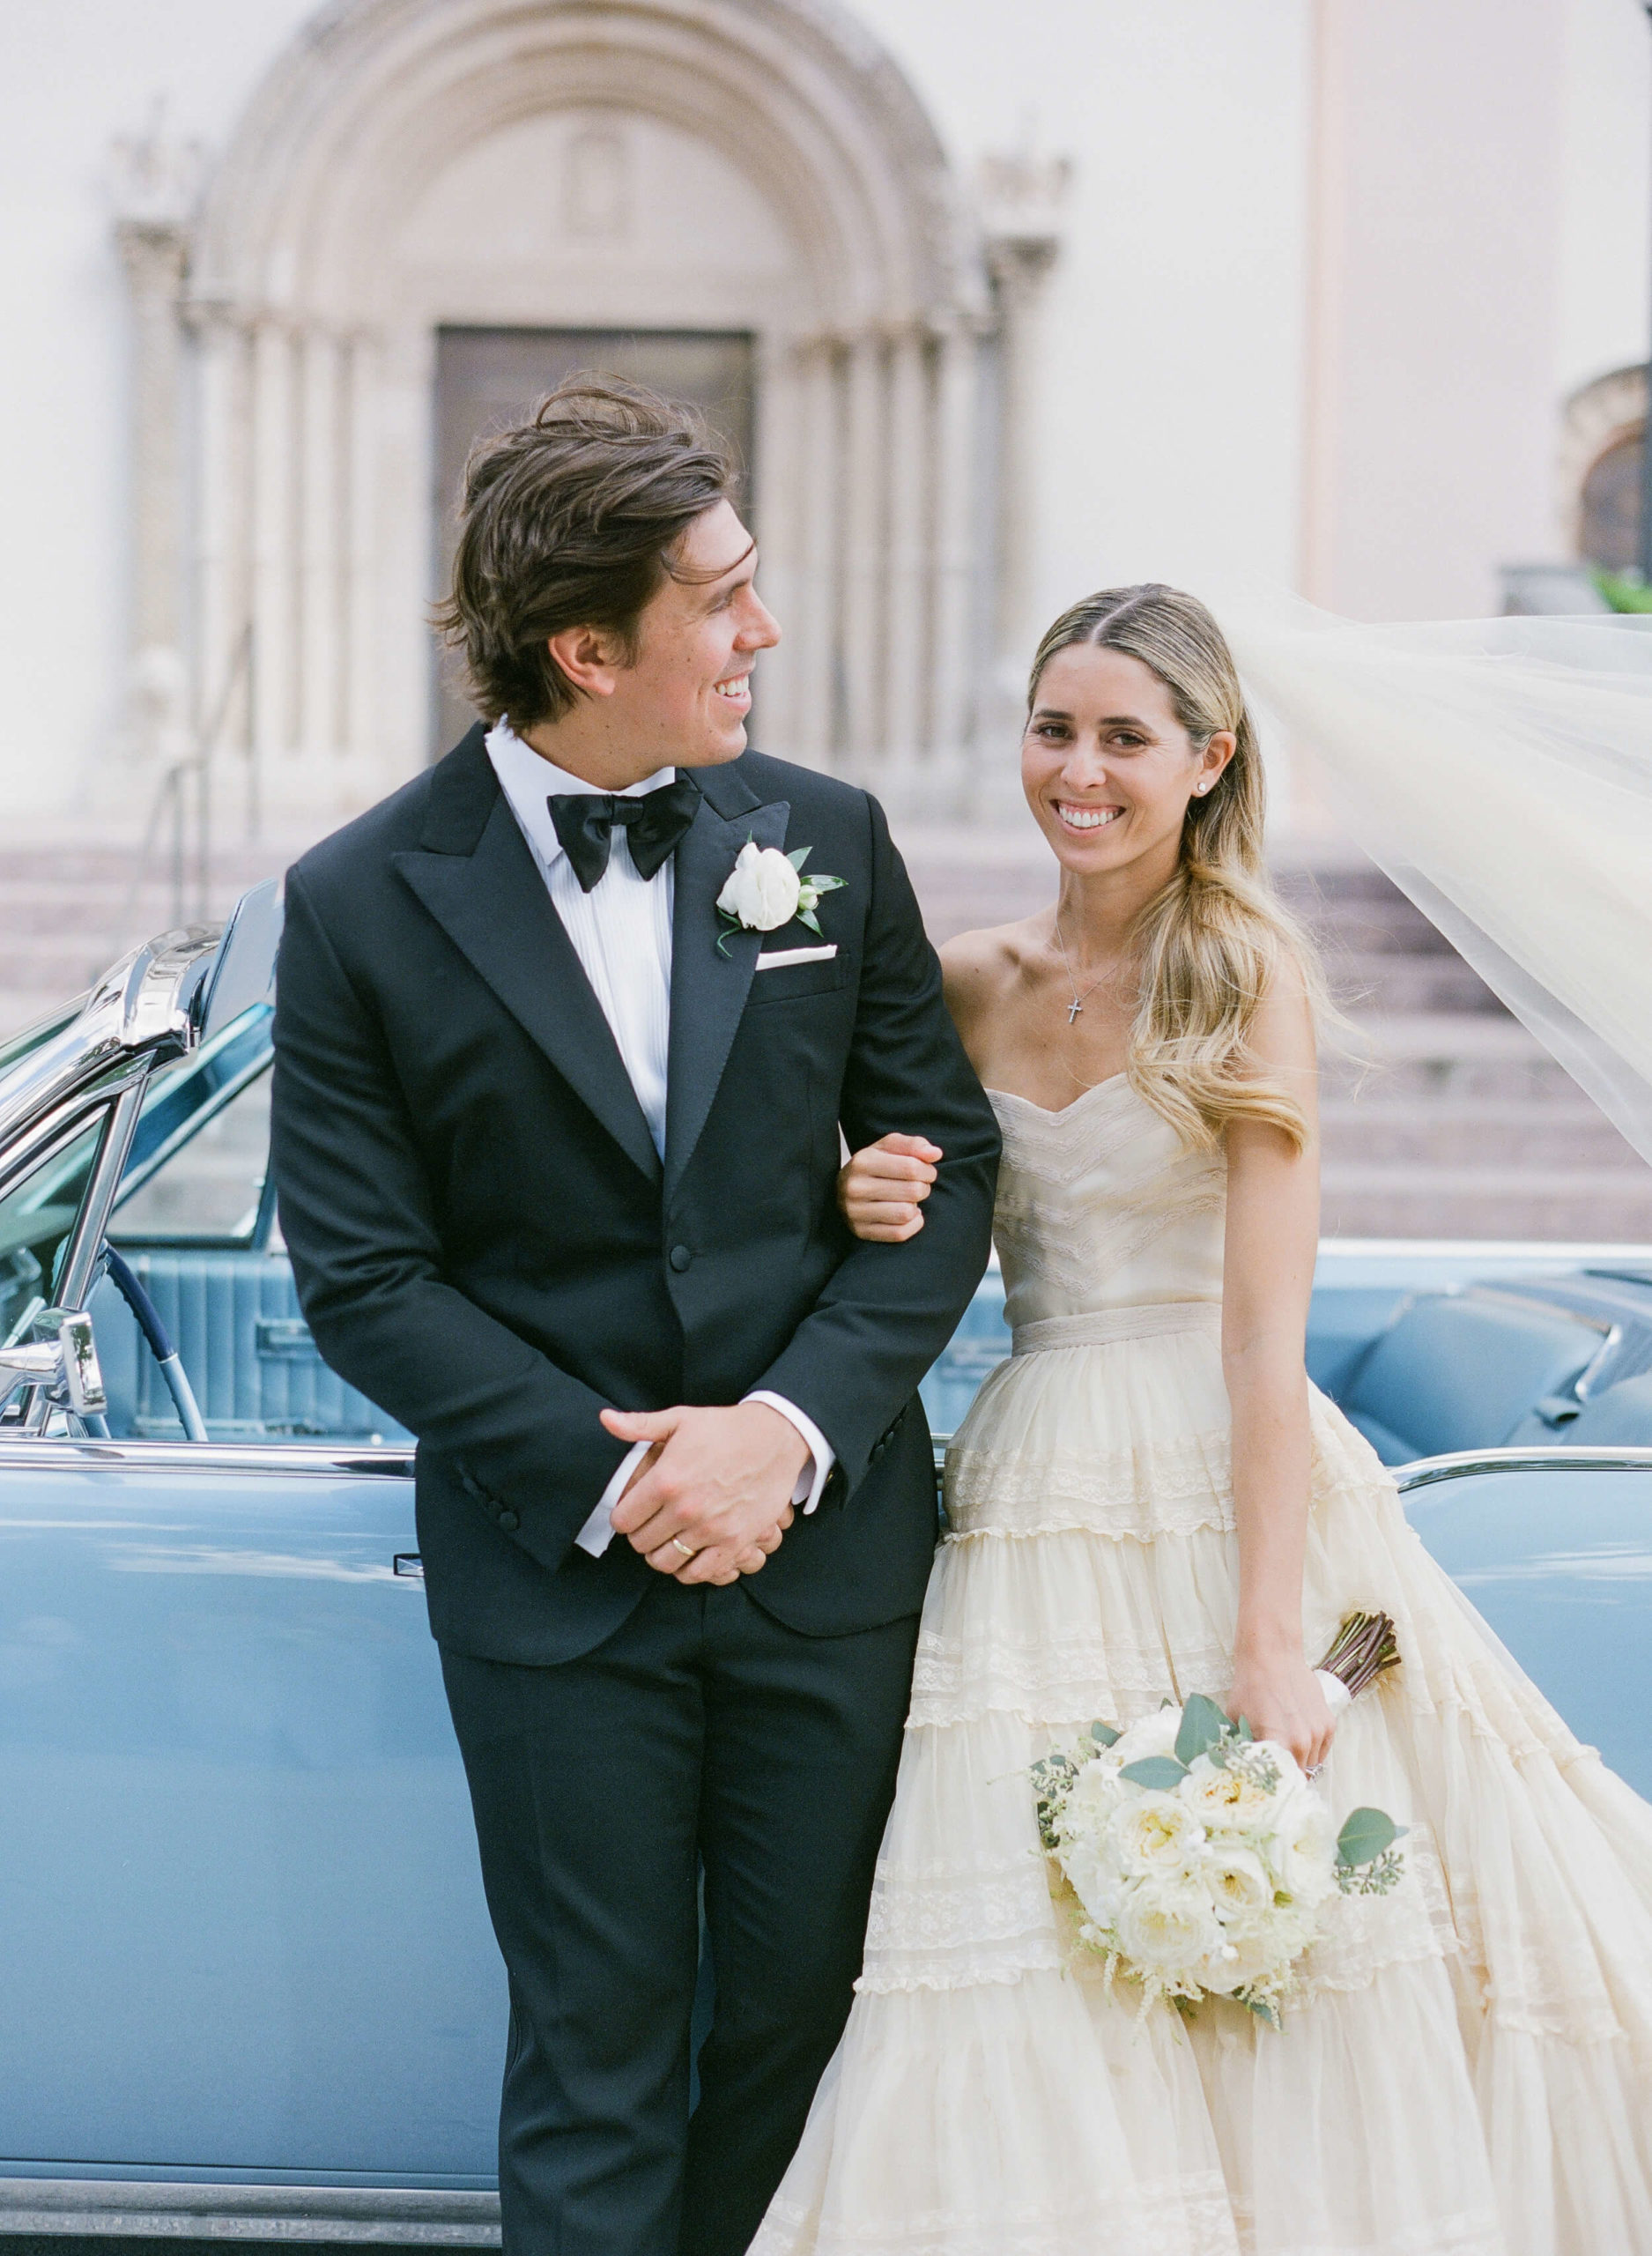 Eunice Kennedy Shriver wore her grandmother's Dior wedding dress to get married in Miami to Michael "Mikey" Garcia. They were married at St. Patricks Catholic Church and drove away in a baby blue 1965 Lincoln Continental.